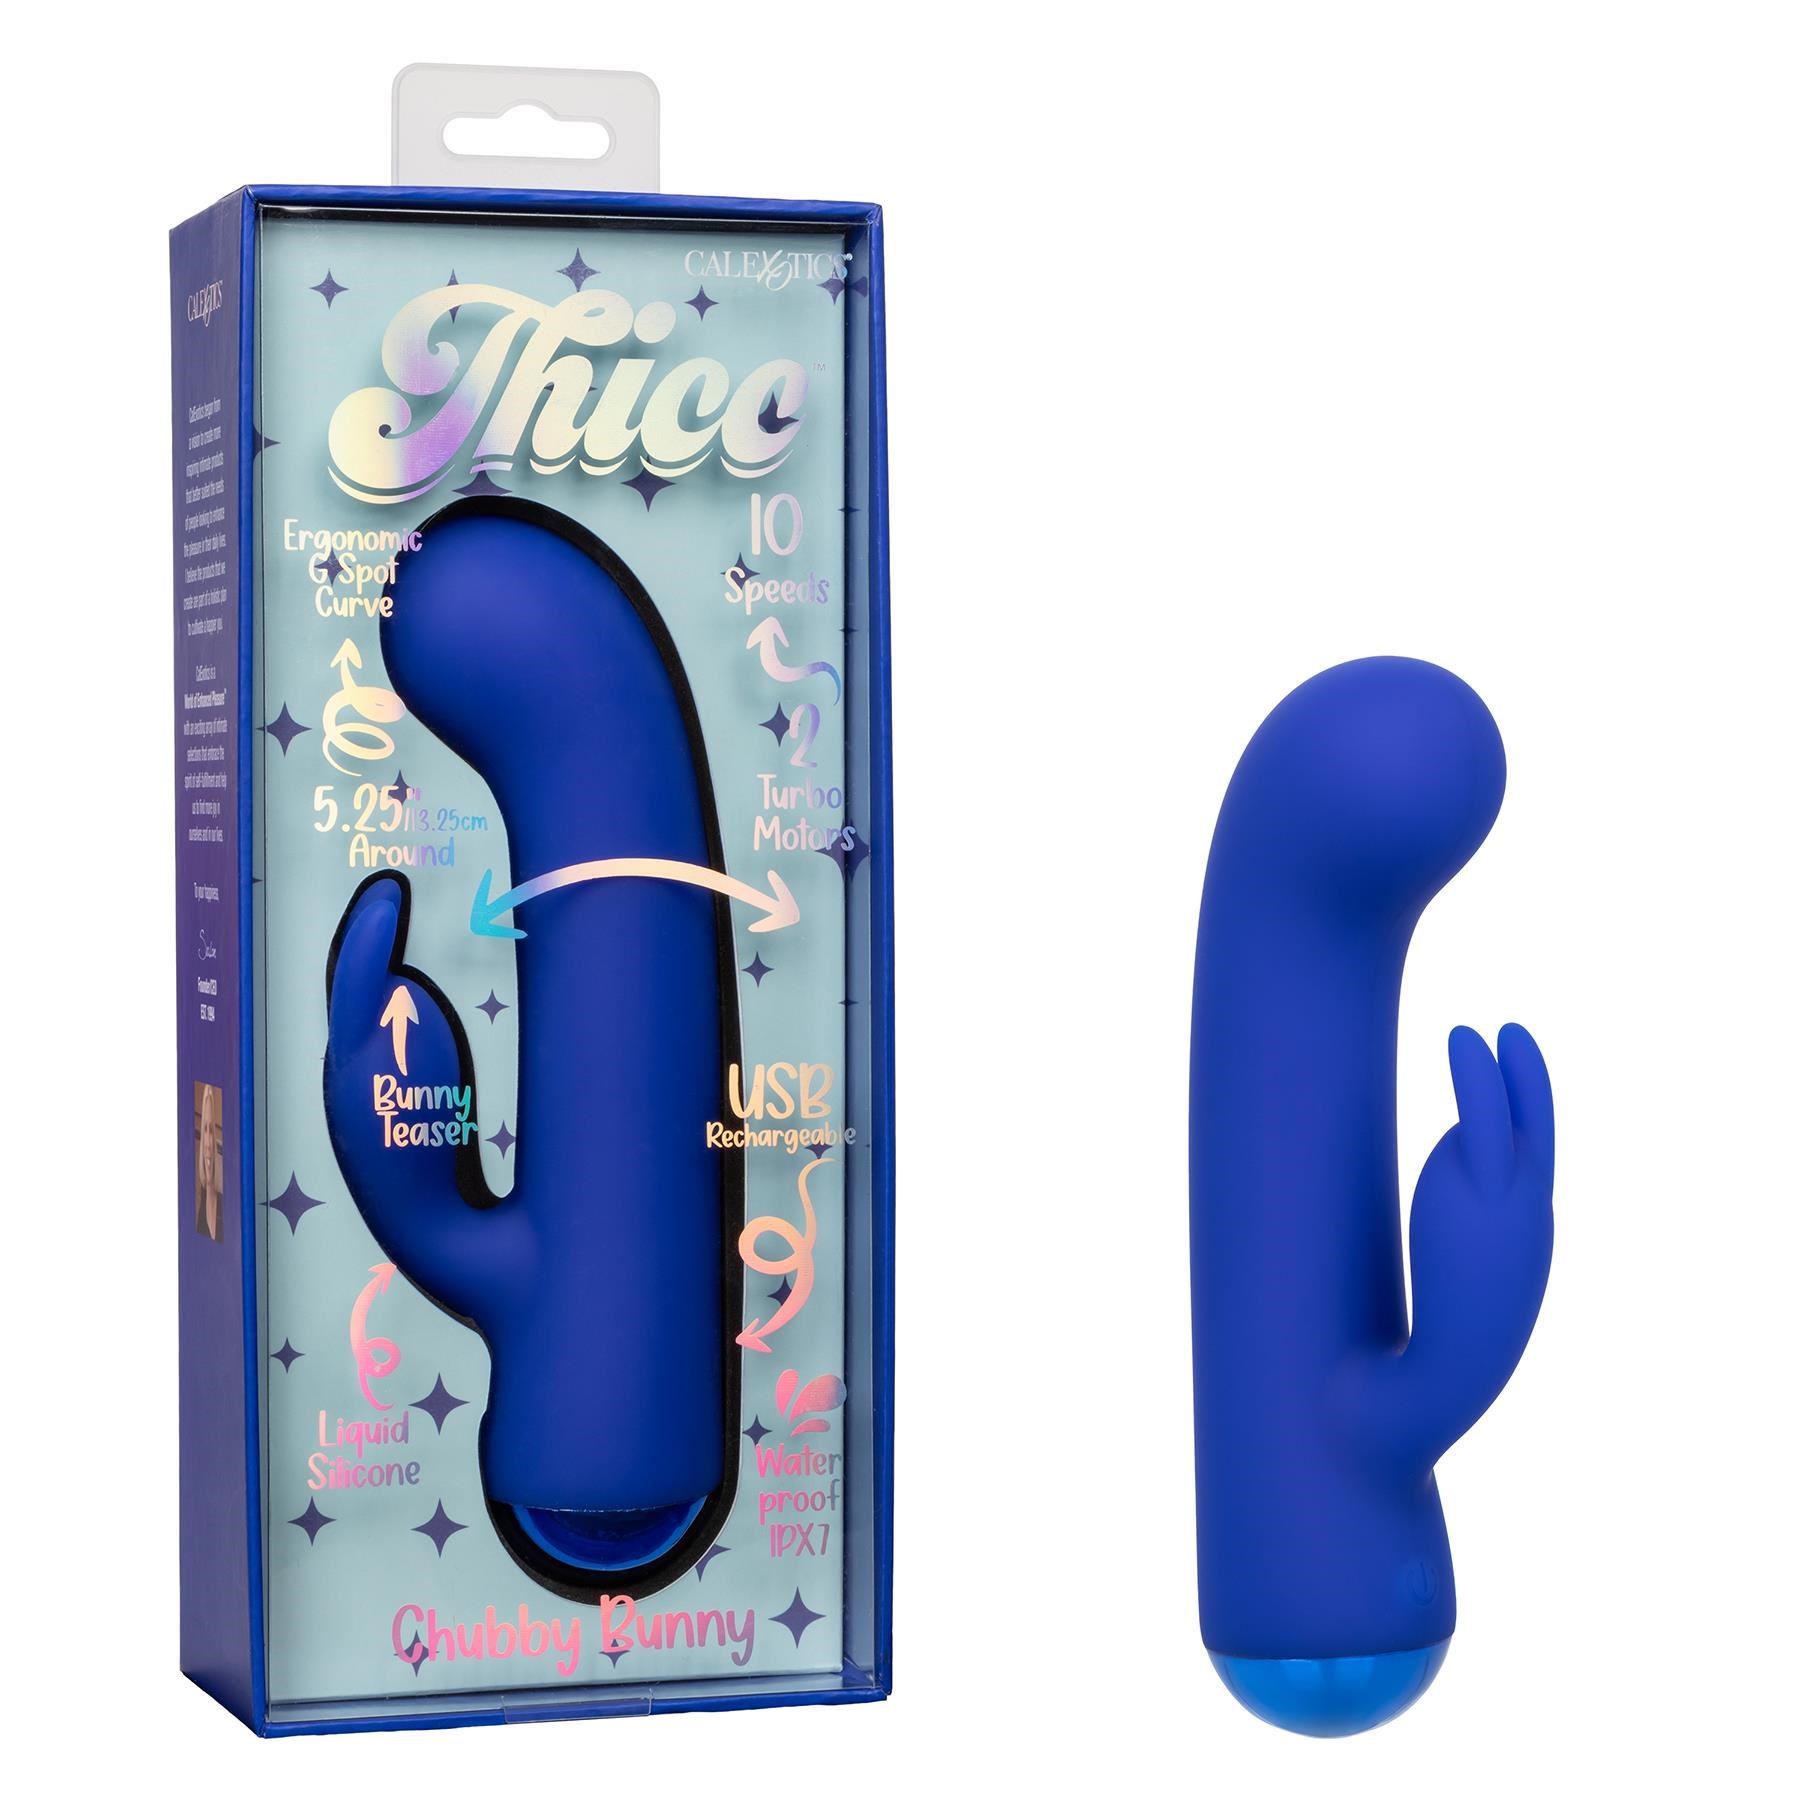 Thicc Chubby Bunny G-Spot Rabbit - Product and Packaging